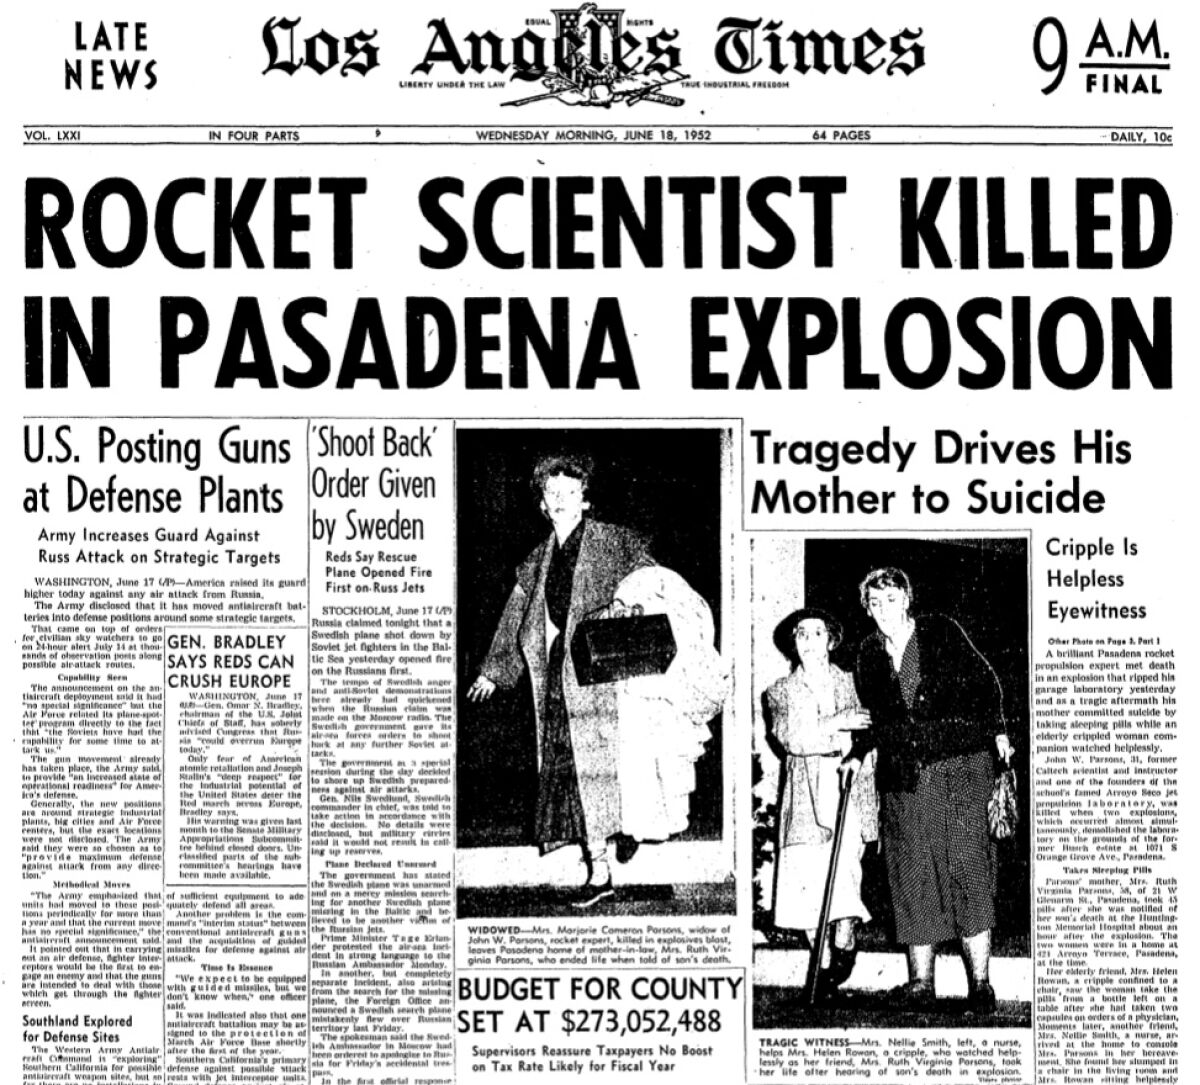 "Rocket scientist killed in Pasadena explosion," read The Times' banner headline when Jack Parsons died in 1952.